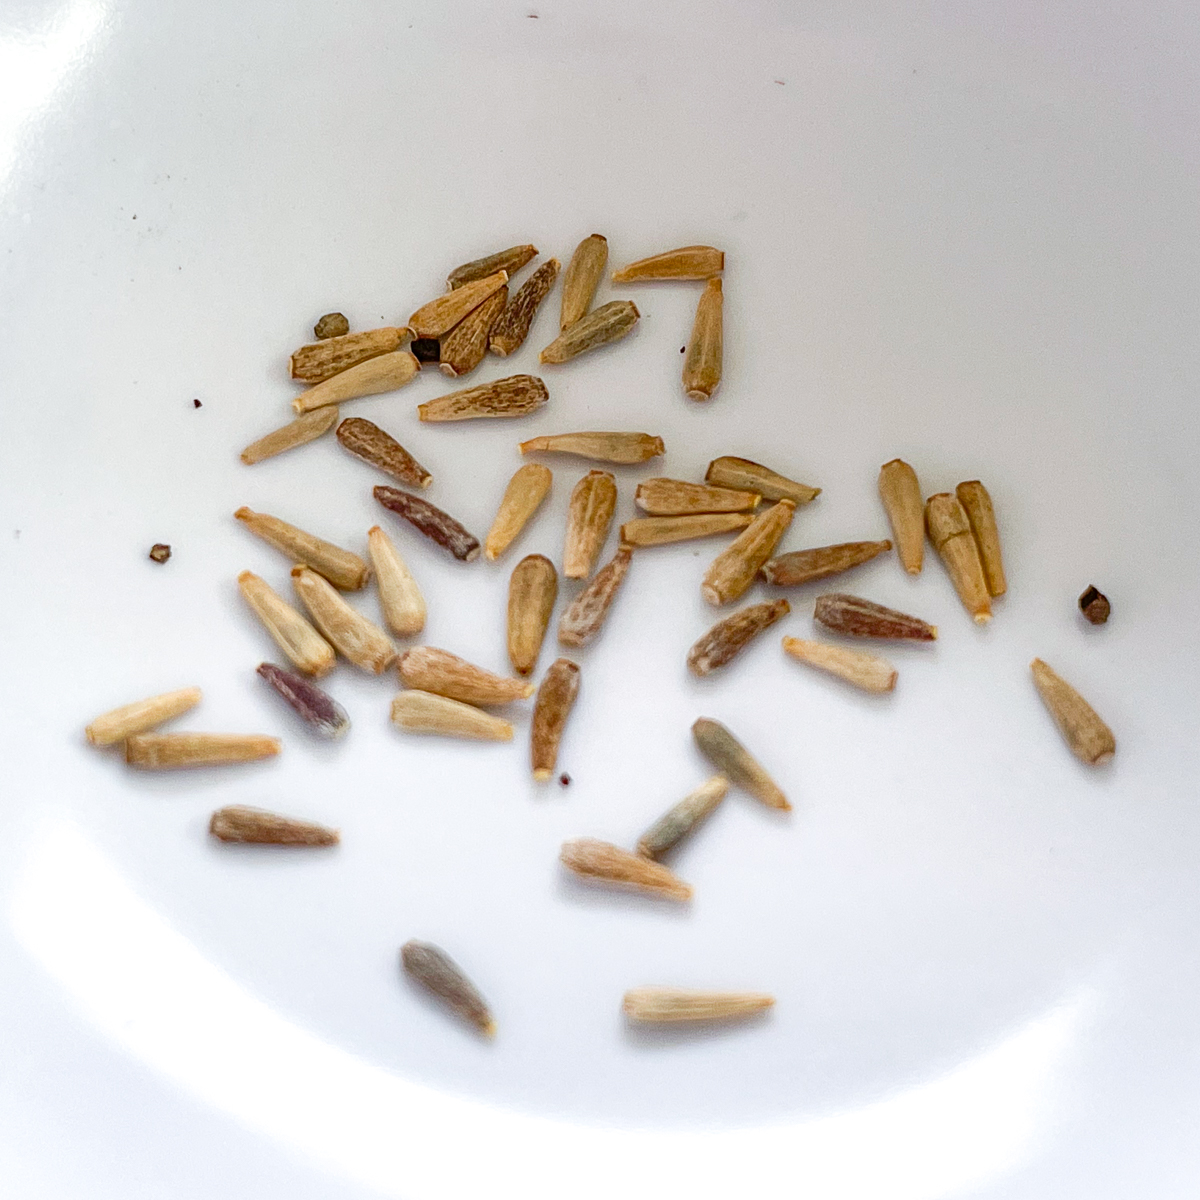 aster seeds in white bowl